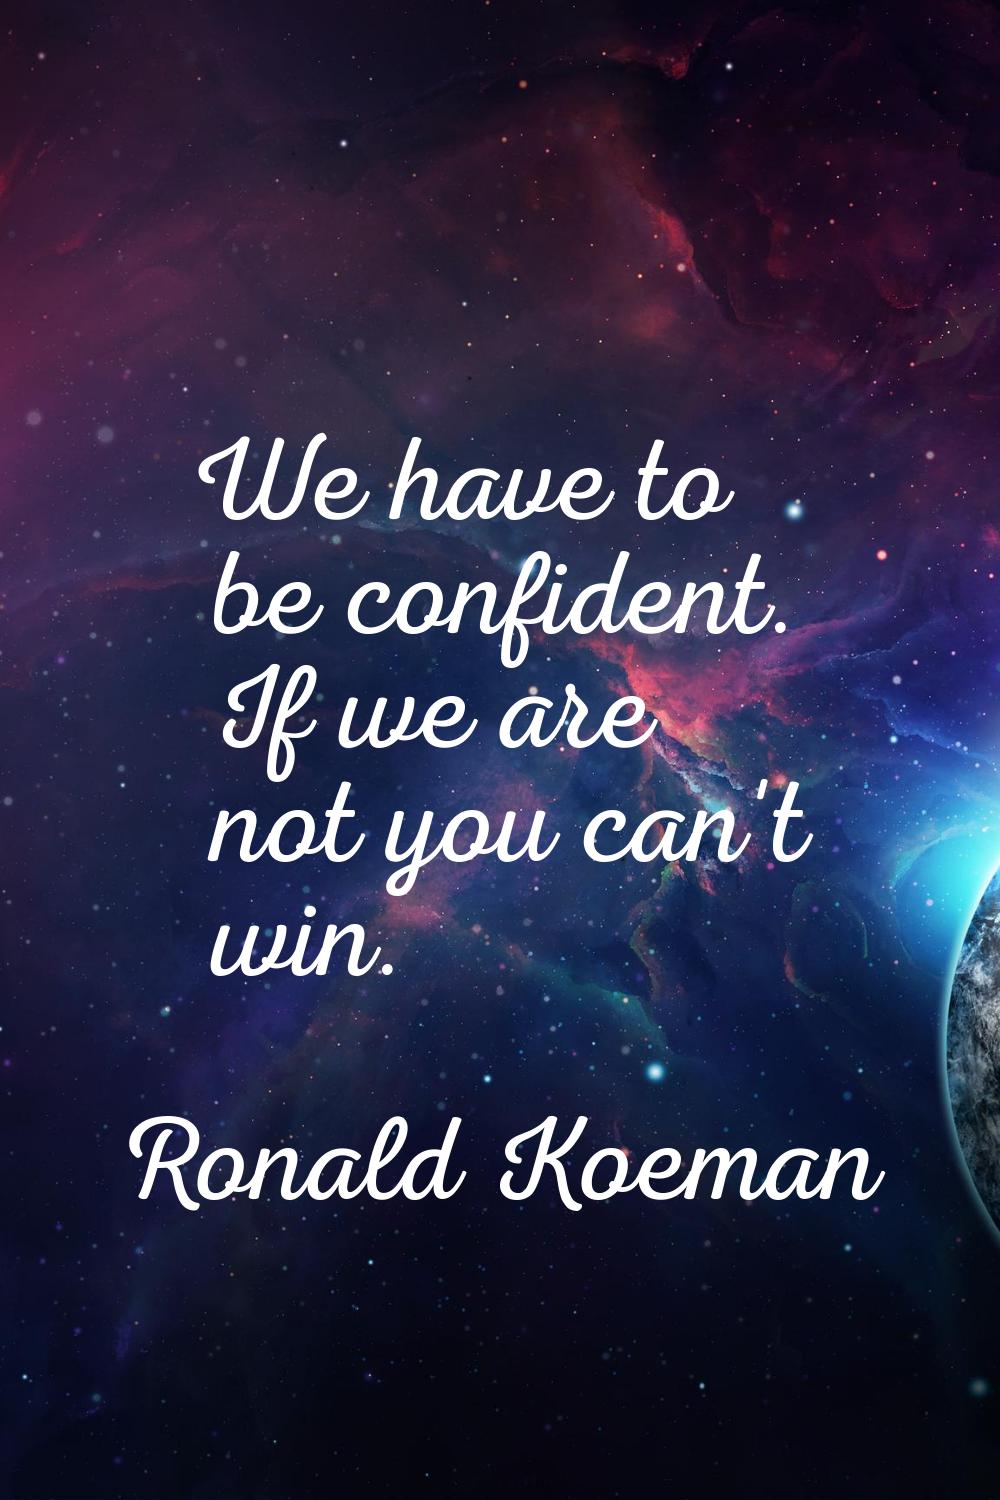 We have to be confident. If we are not you can't win.